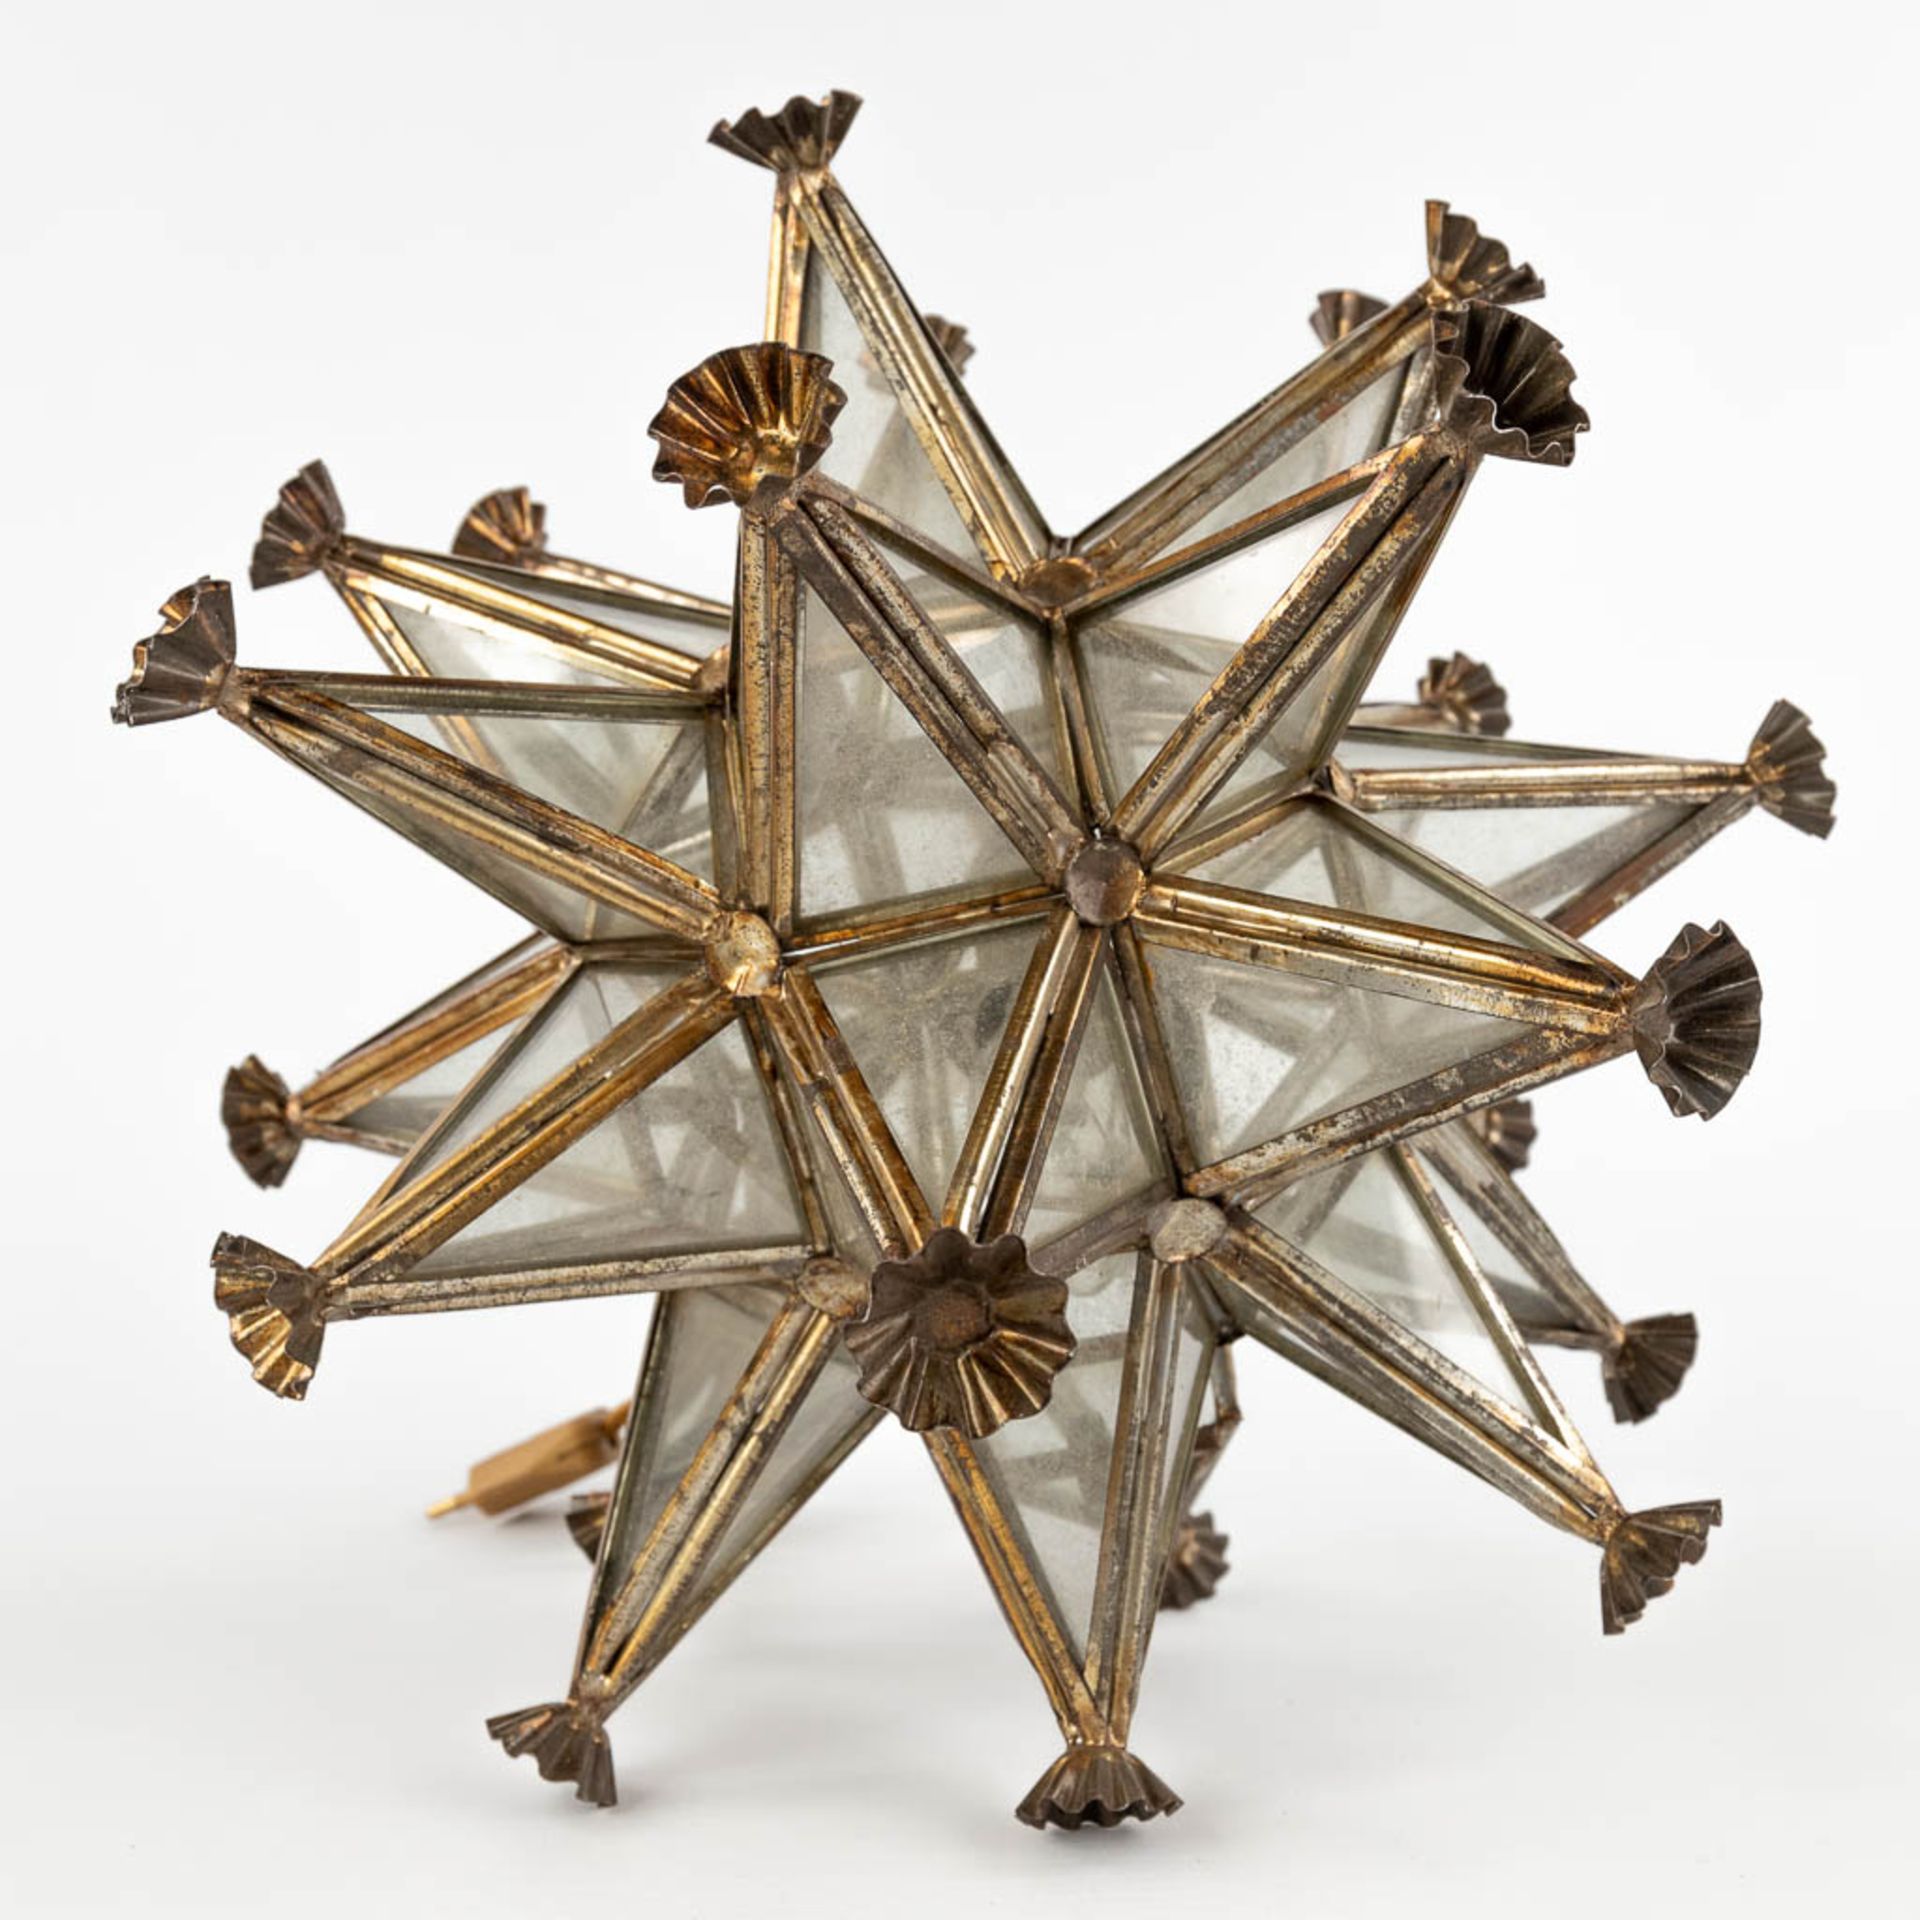 A lantern in the shape of a star, copper and glass, circa 1950. (W:25 x H:25 x D:25 cm) - Image 9 of 12